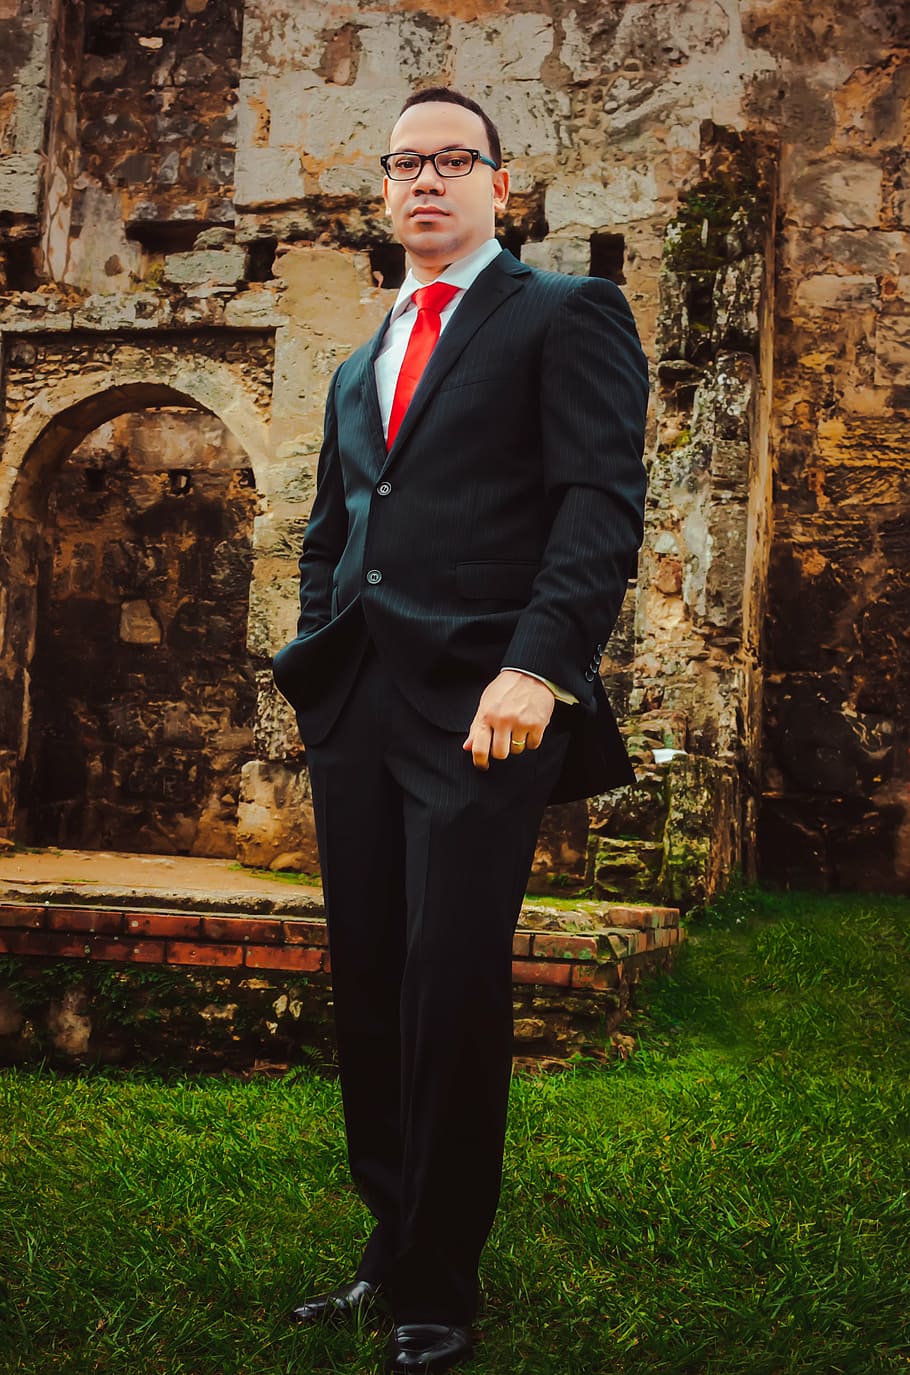 boyfriend, waiting for you, the bride, bank, romantic, hold on, landscape, well-dressed, young adult, suit